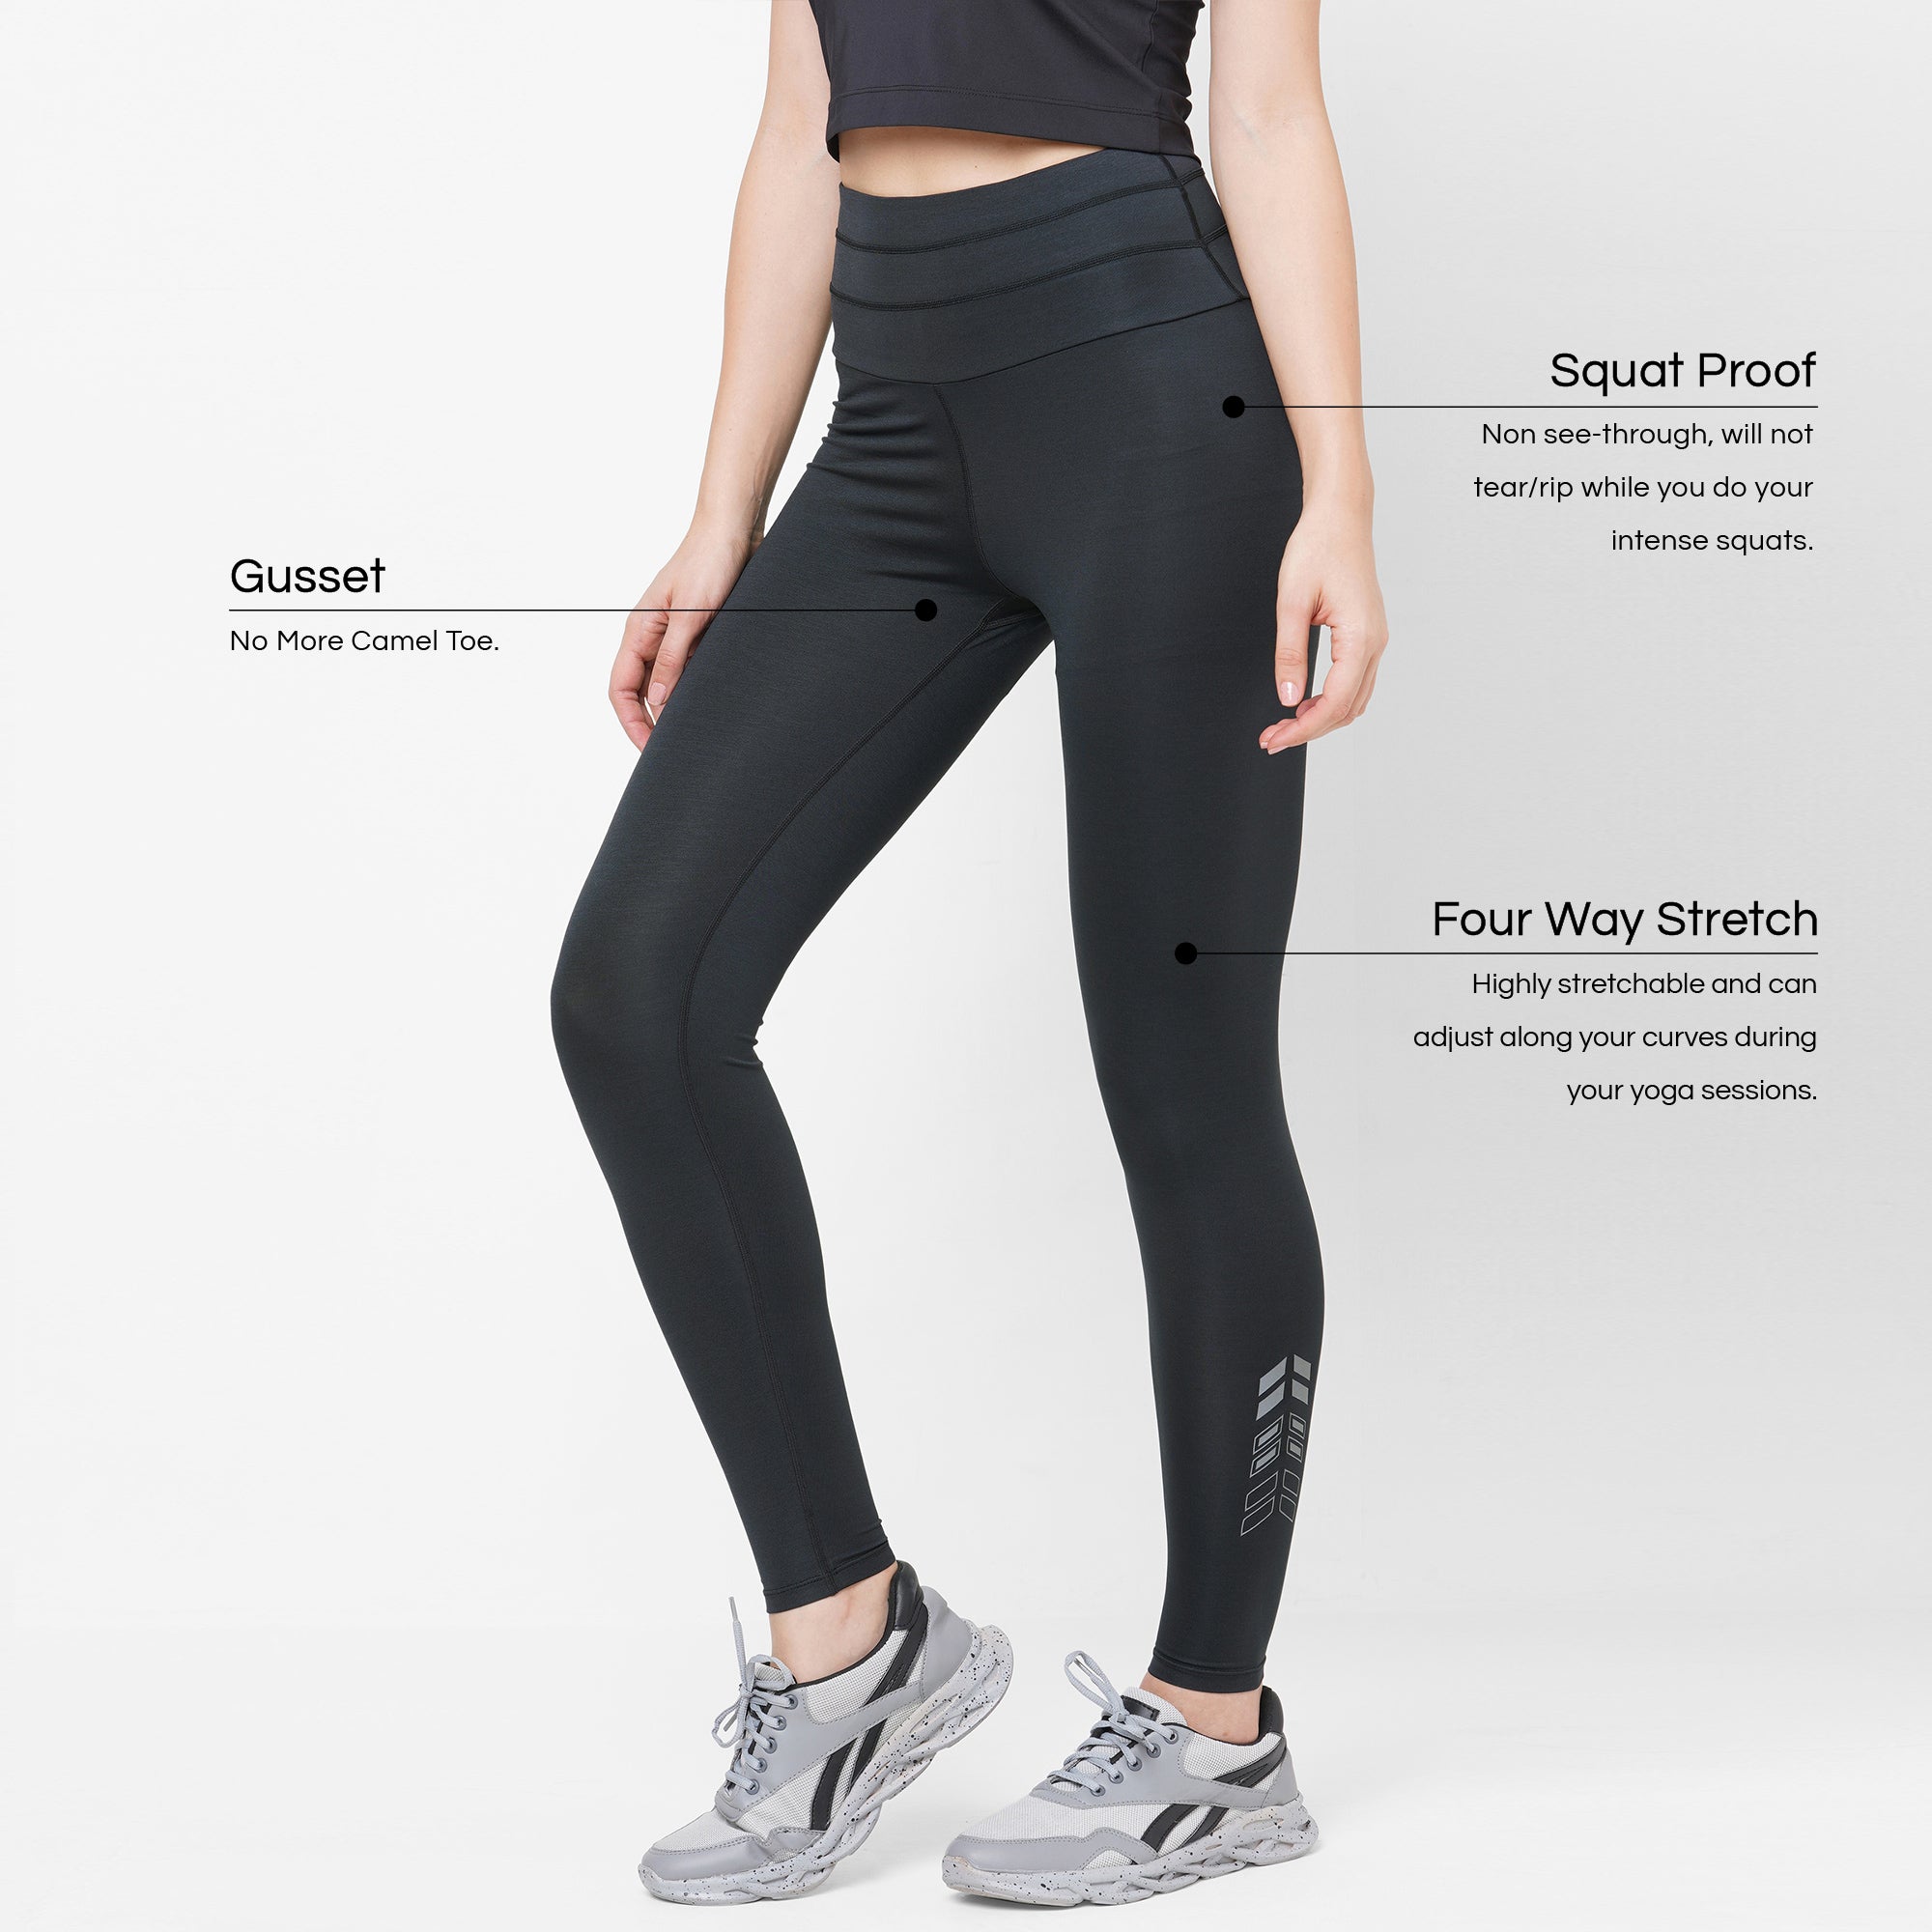 Buy ALONG FIT Leggings with Wine Bottle Pockets for Women High Waist Yoga  Pants Tummy Control Yoga Leggings for Workout Running at Amazon.in